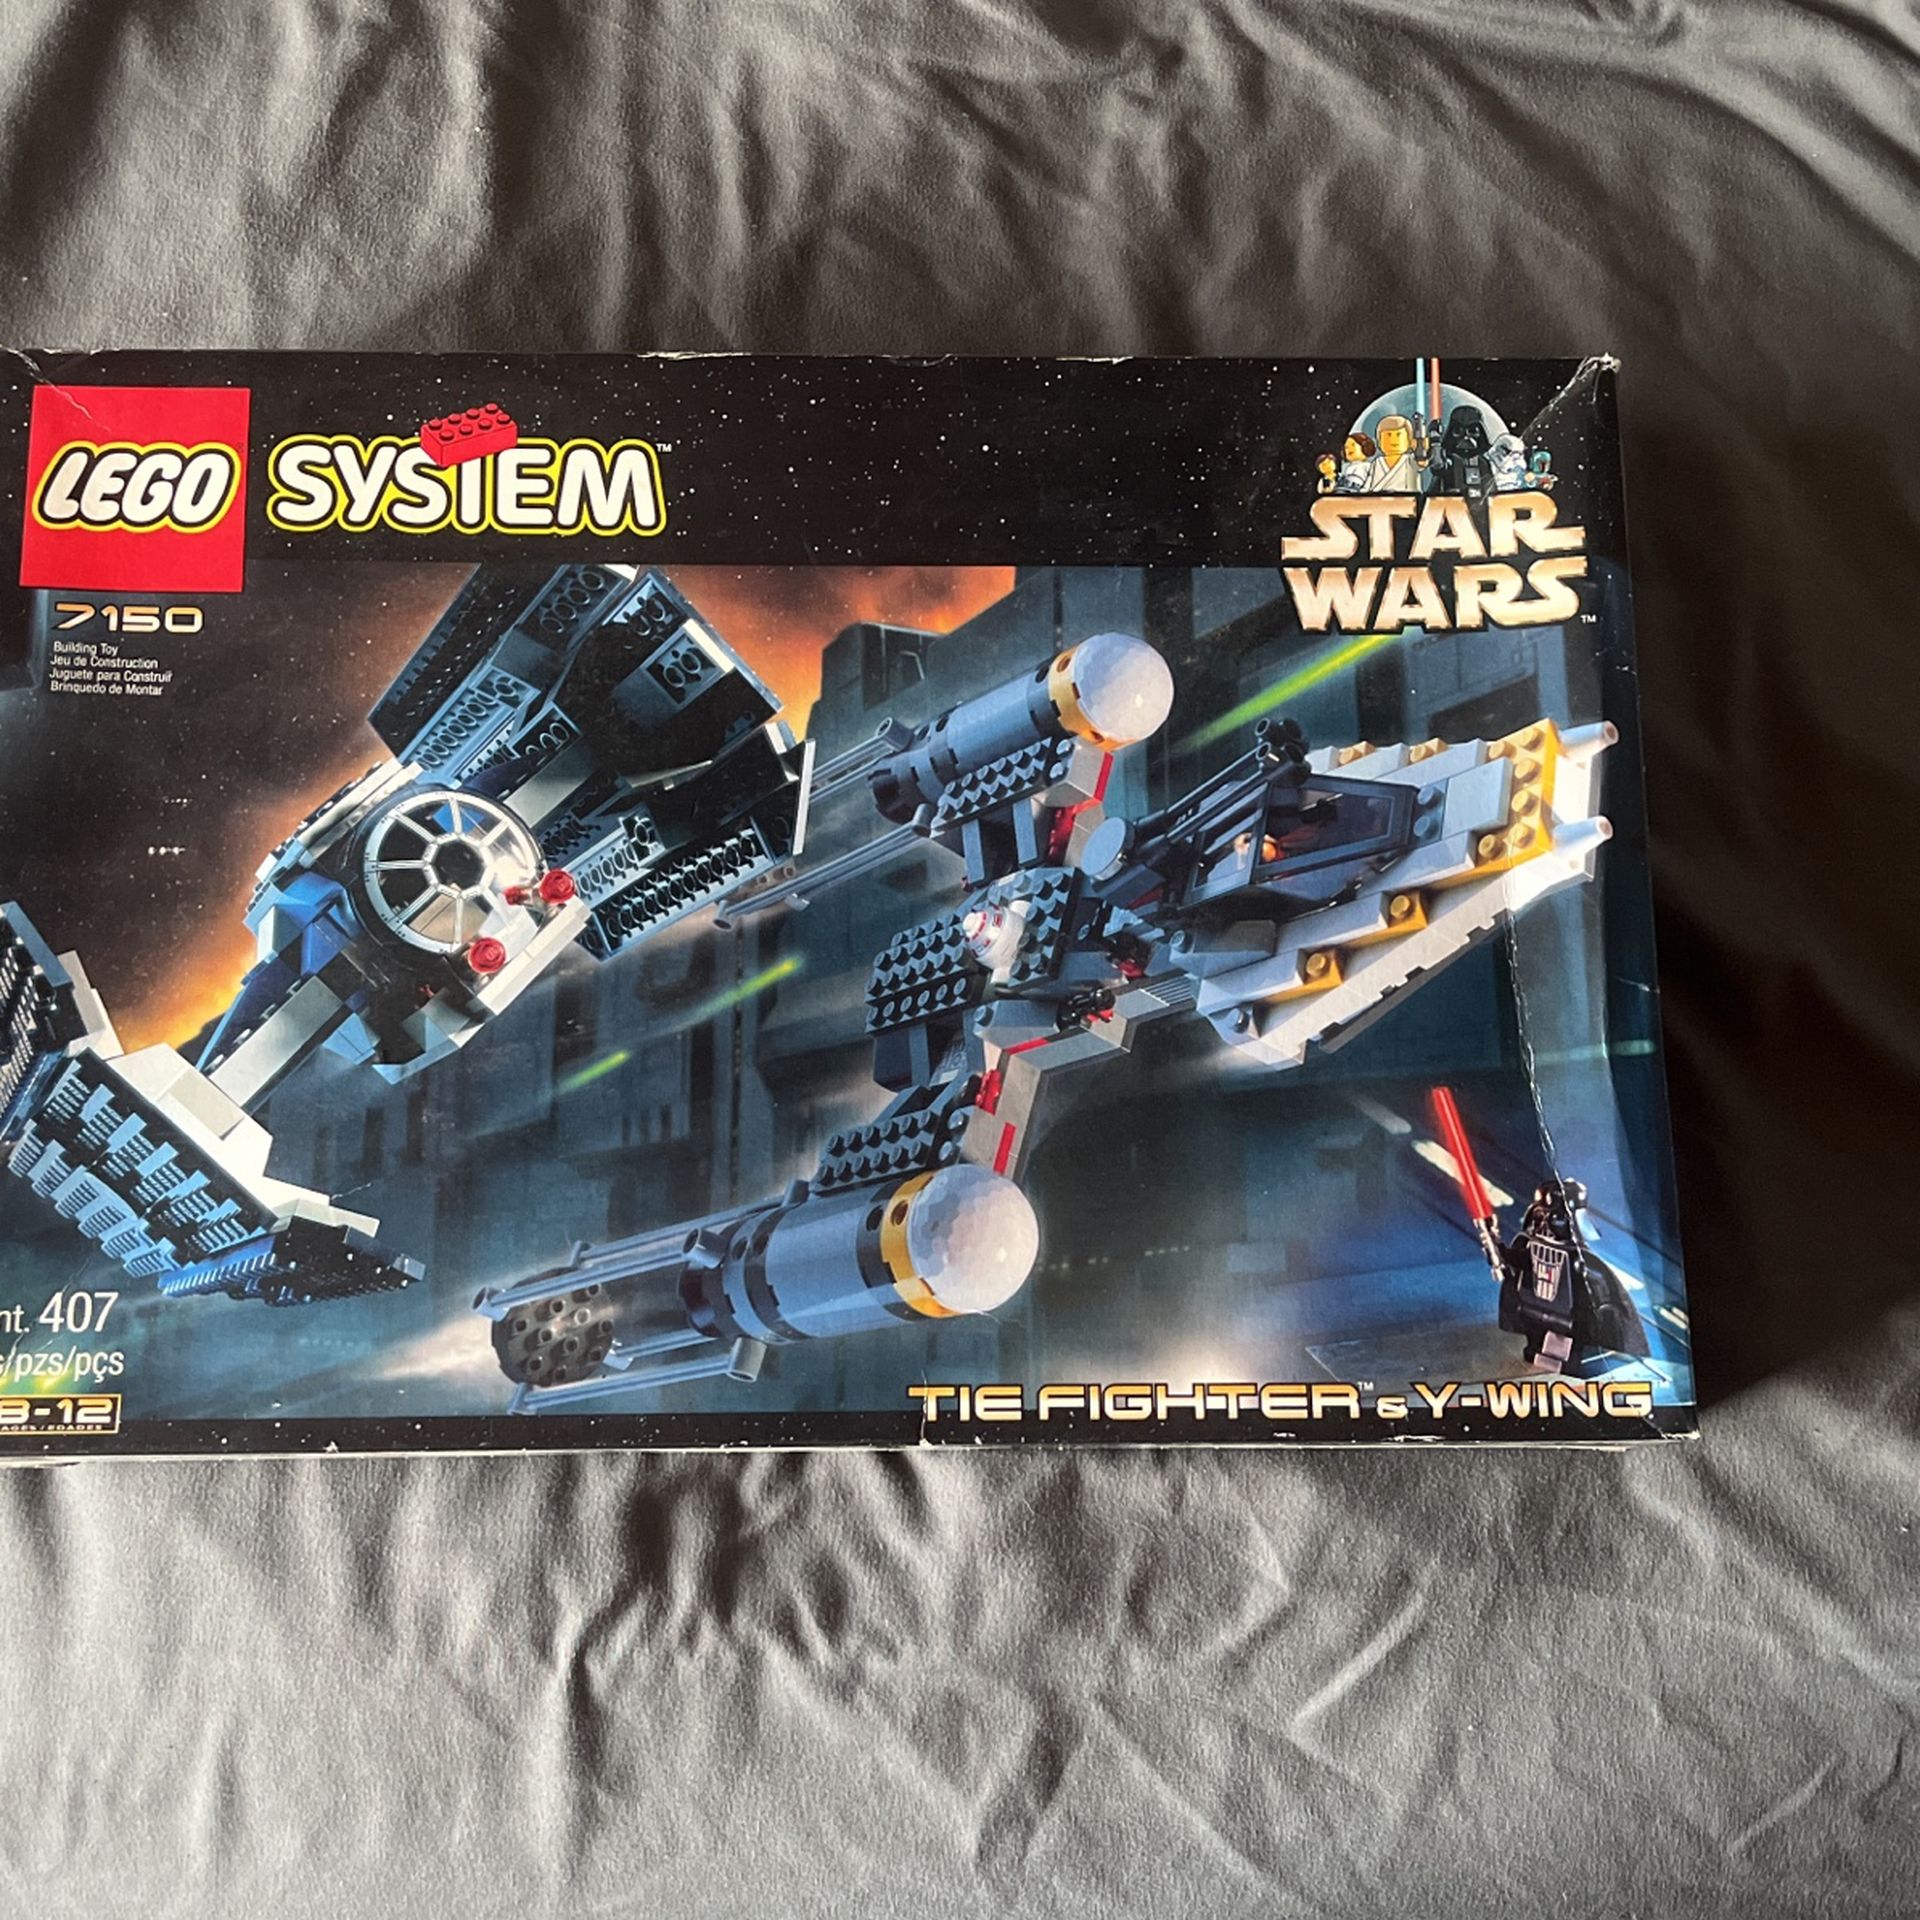 Star Wars Lego Set 7150 Tie Fighter And Y-wing